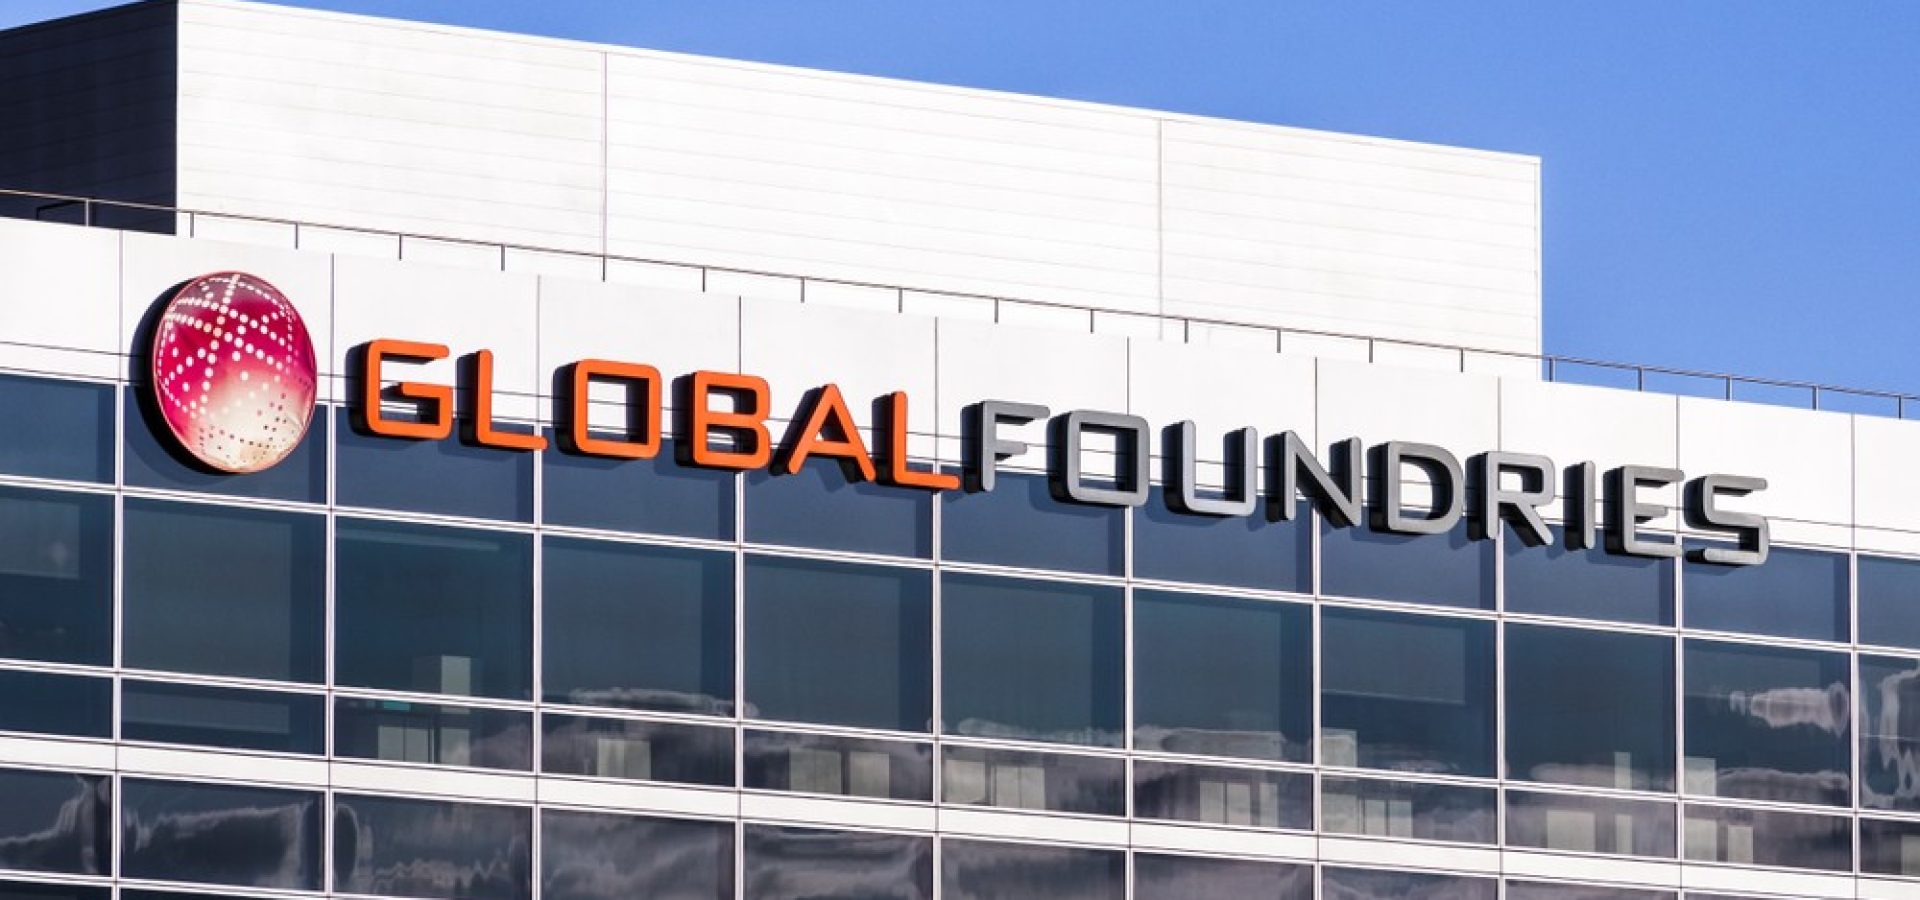 Hot demand on chips made GlobalFoundries build a new plant